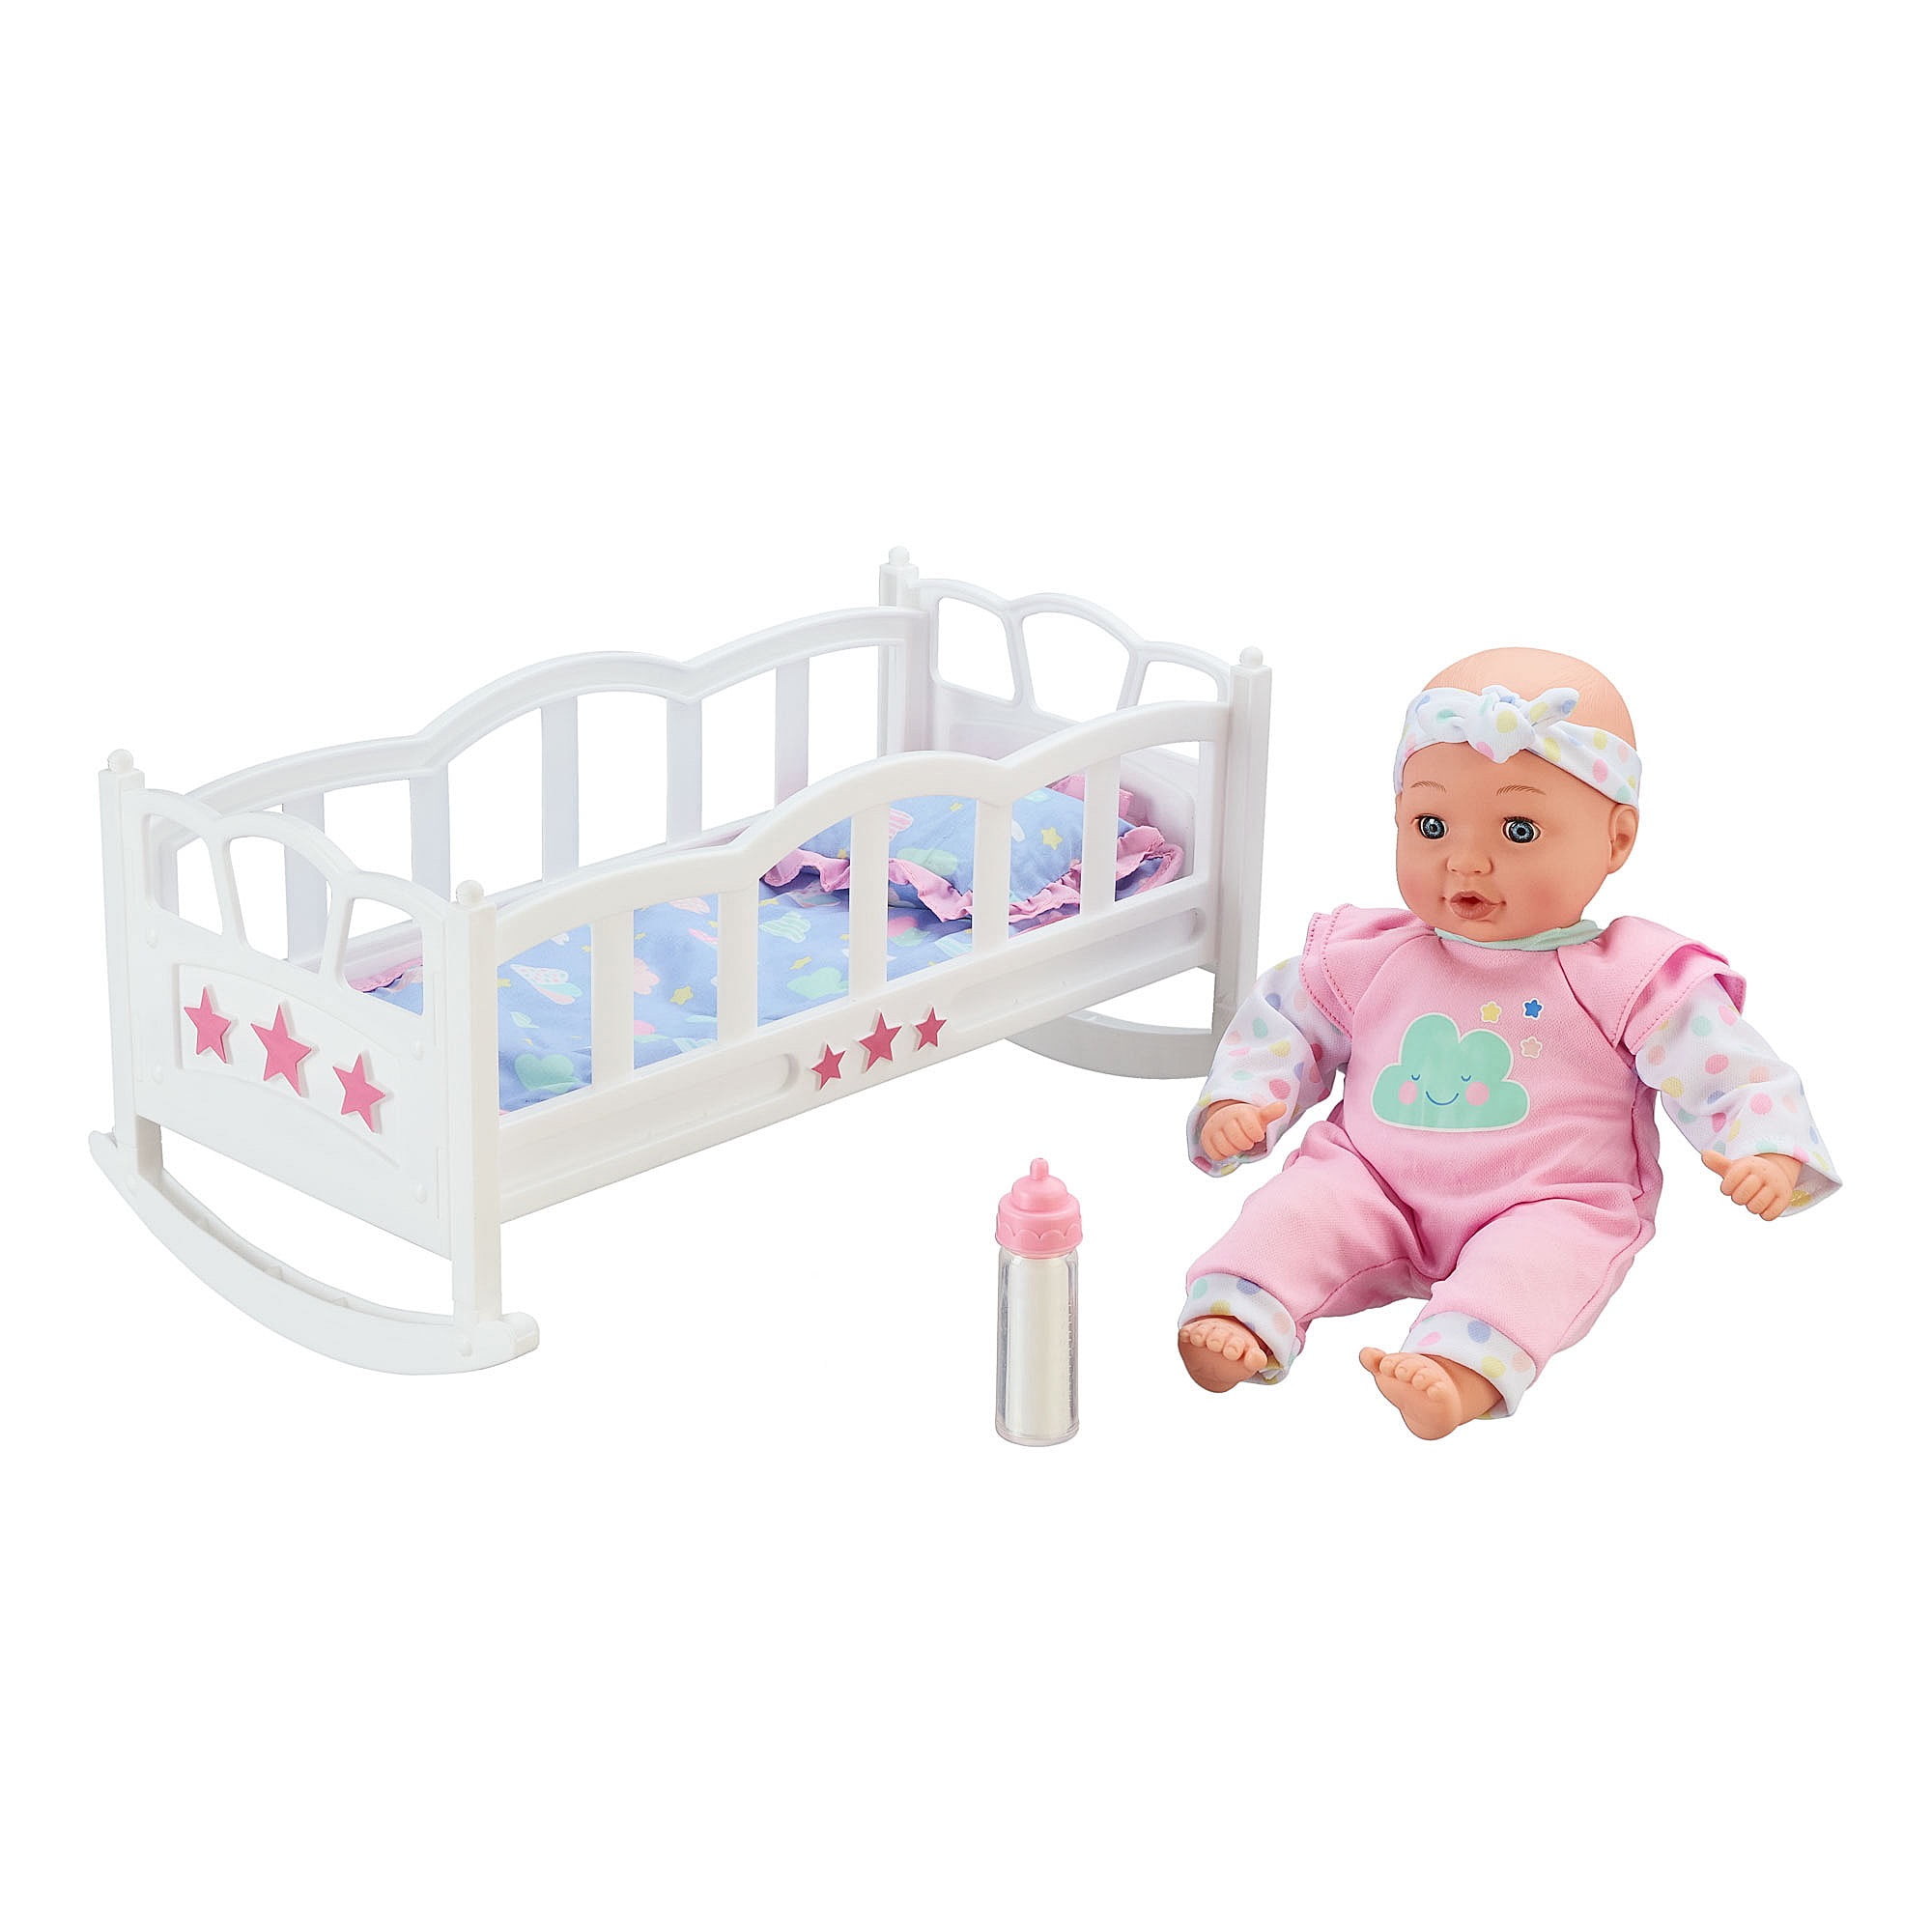 Snuggles Baby Dolls Pink Swing Removable Carry Cot Cradle Cot Kid Role Play Toy 